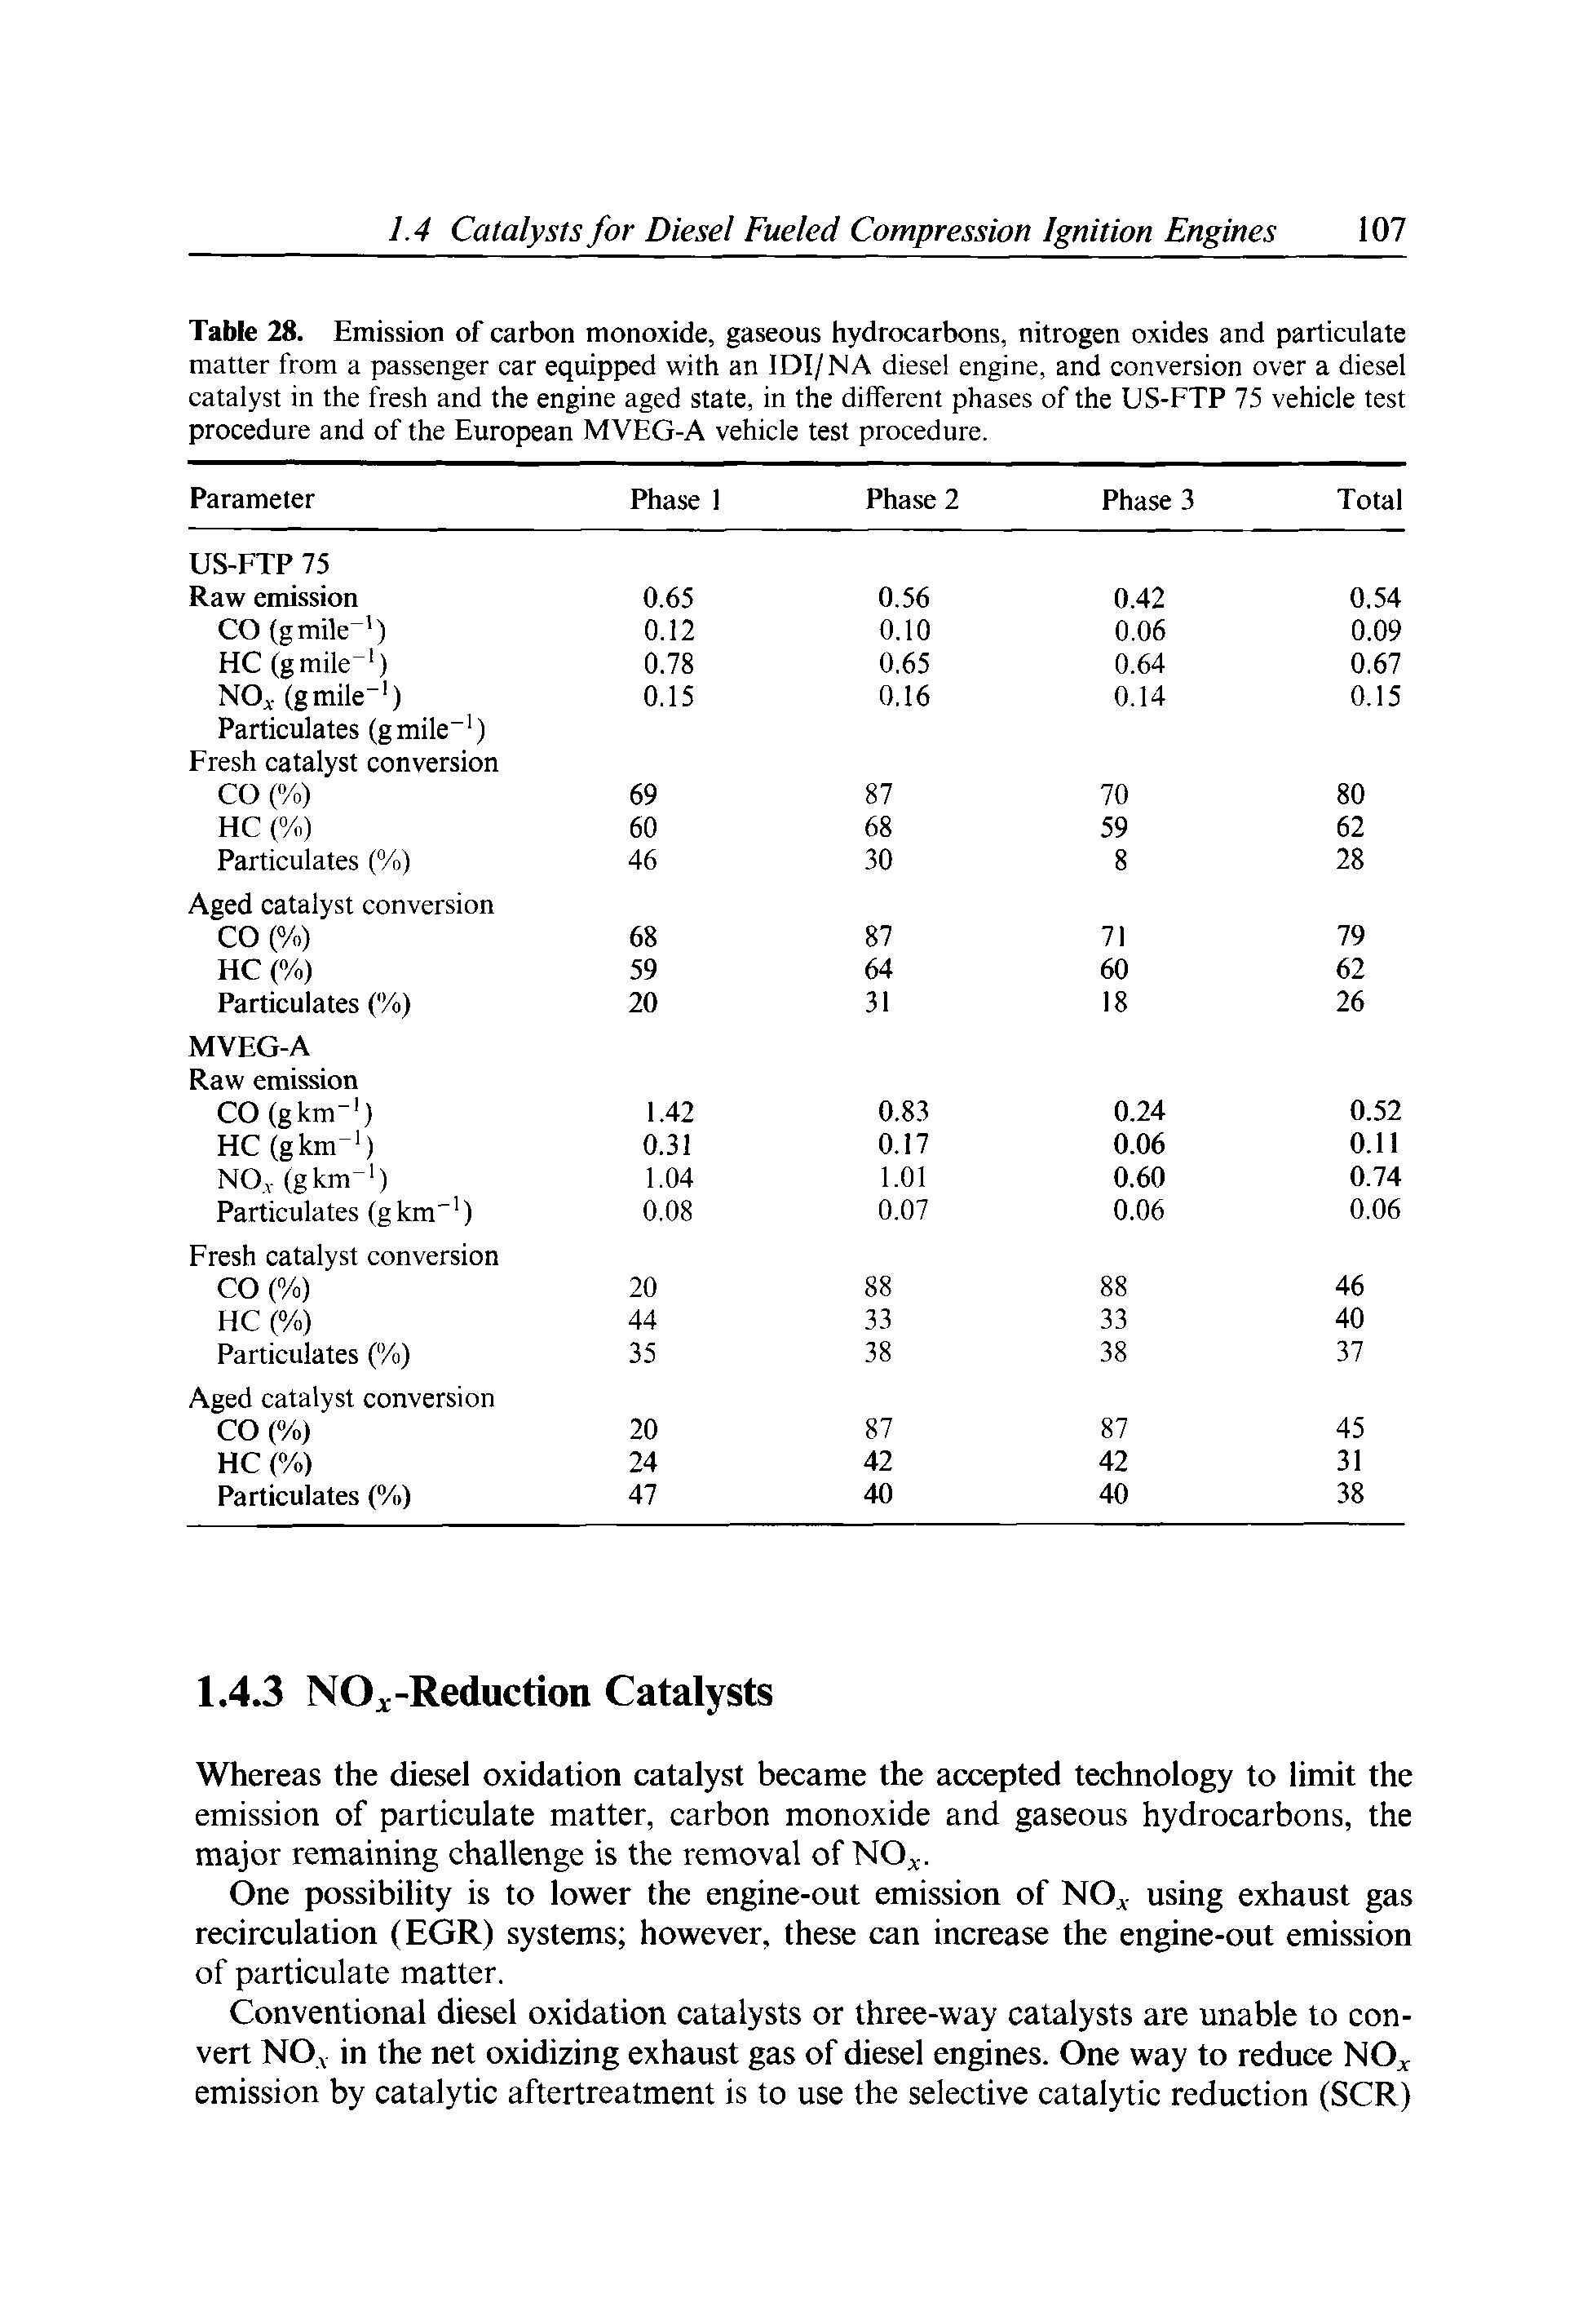 Table 28. Emission of carbon monoxide, gaseous hydrocarbons, nitrogen oxides and particulate matter from a passenger car equipped with an IDI/NA diesel engine, and conversion over a diesel catalyst in the fresh and the engine aged state, in the different phases of the US-FTP 75 vehicle test procedure and of the European MVEG-A vehicle test procedure. ...